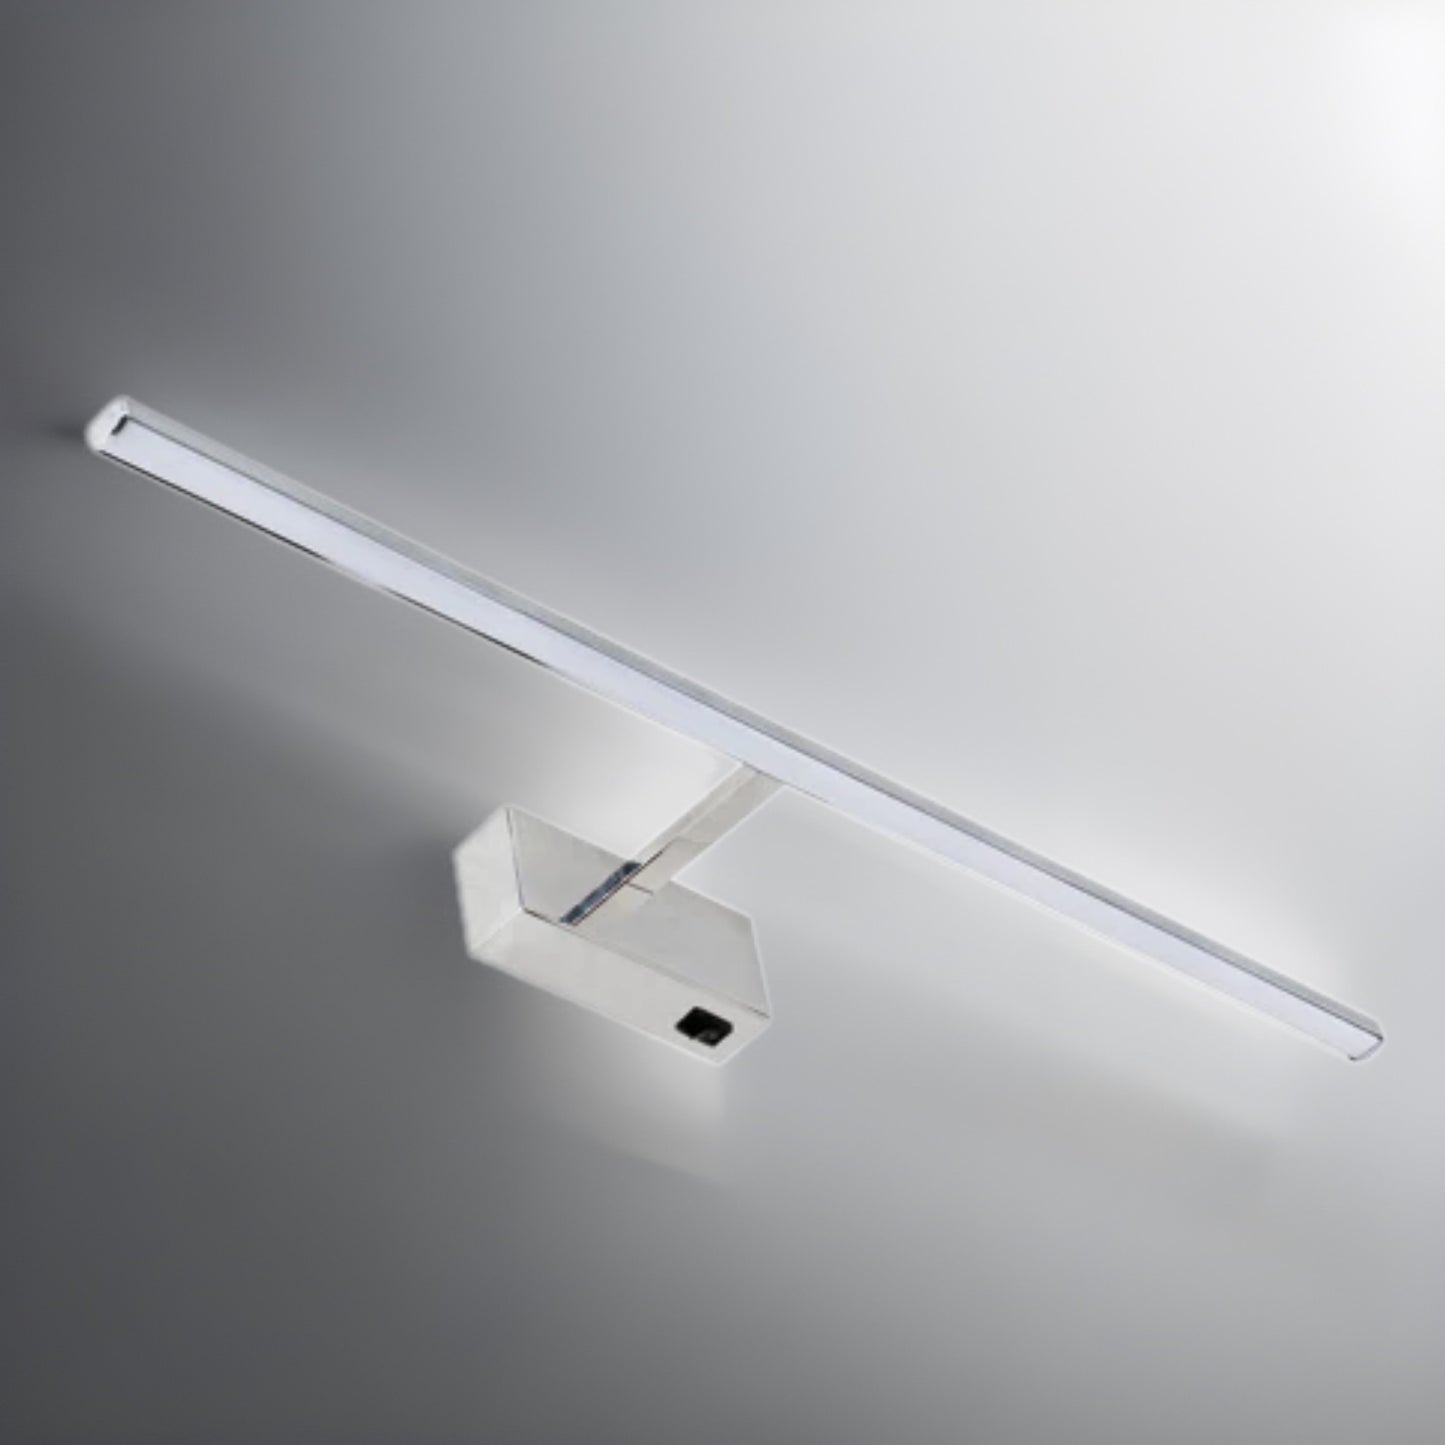 With our Mills LED over mirror wall light you can really give your bathroom or wall space the designer finish it deserves. With its modern chrome body and opal diffuser this light is sure to add style and class to your room. Can also look great as a wall light in hallways, over pictures and in kitchens. Mills is the perfect simple light to fix over a mirror